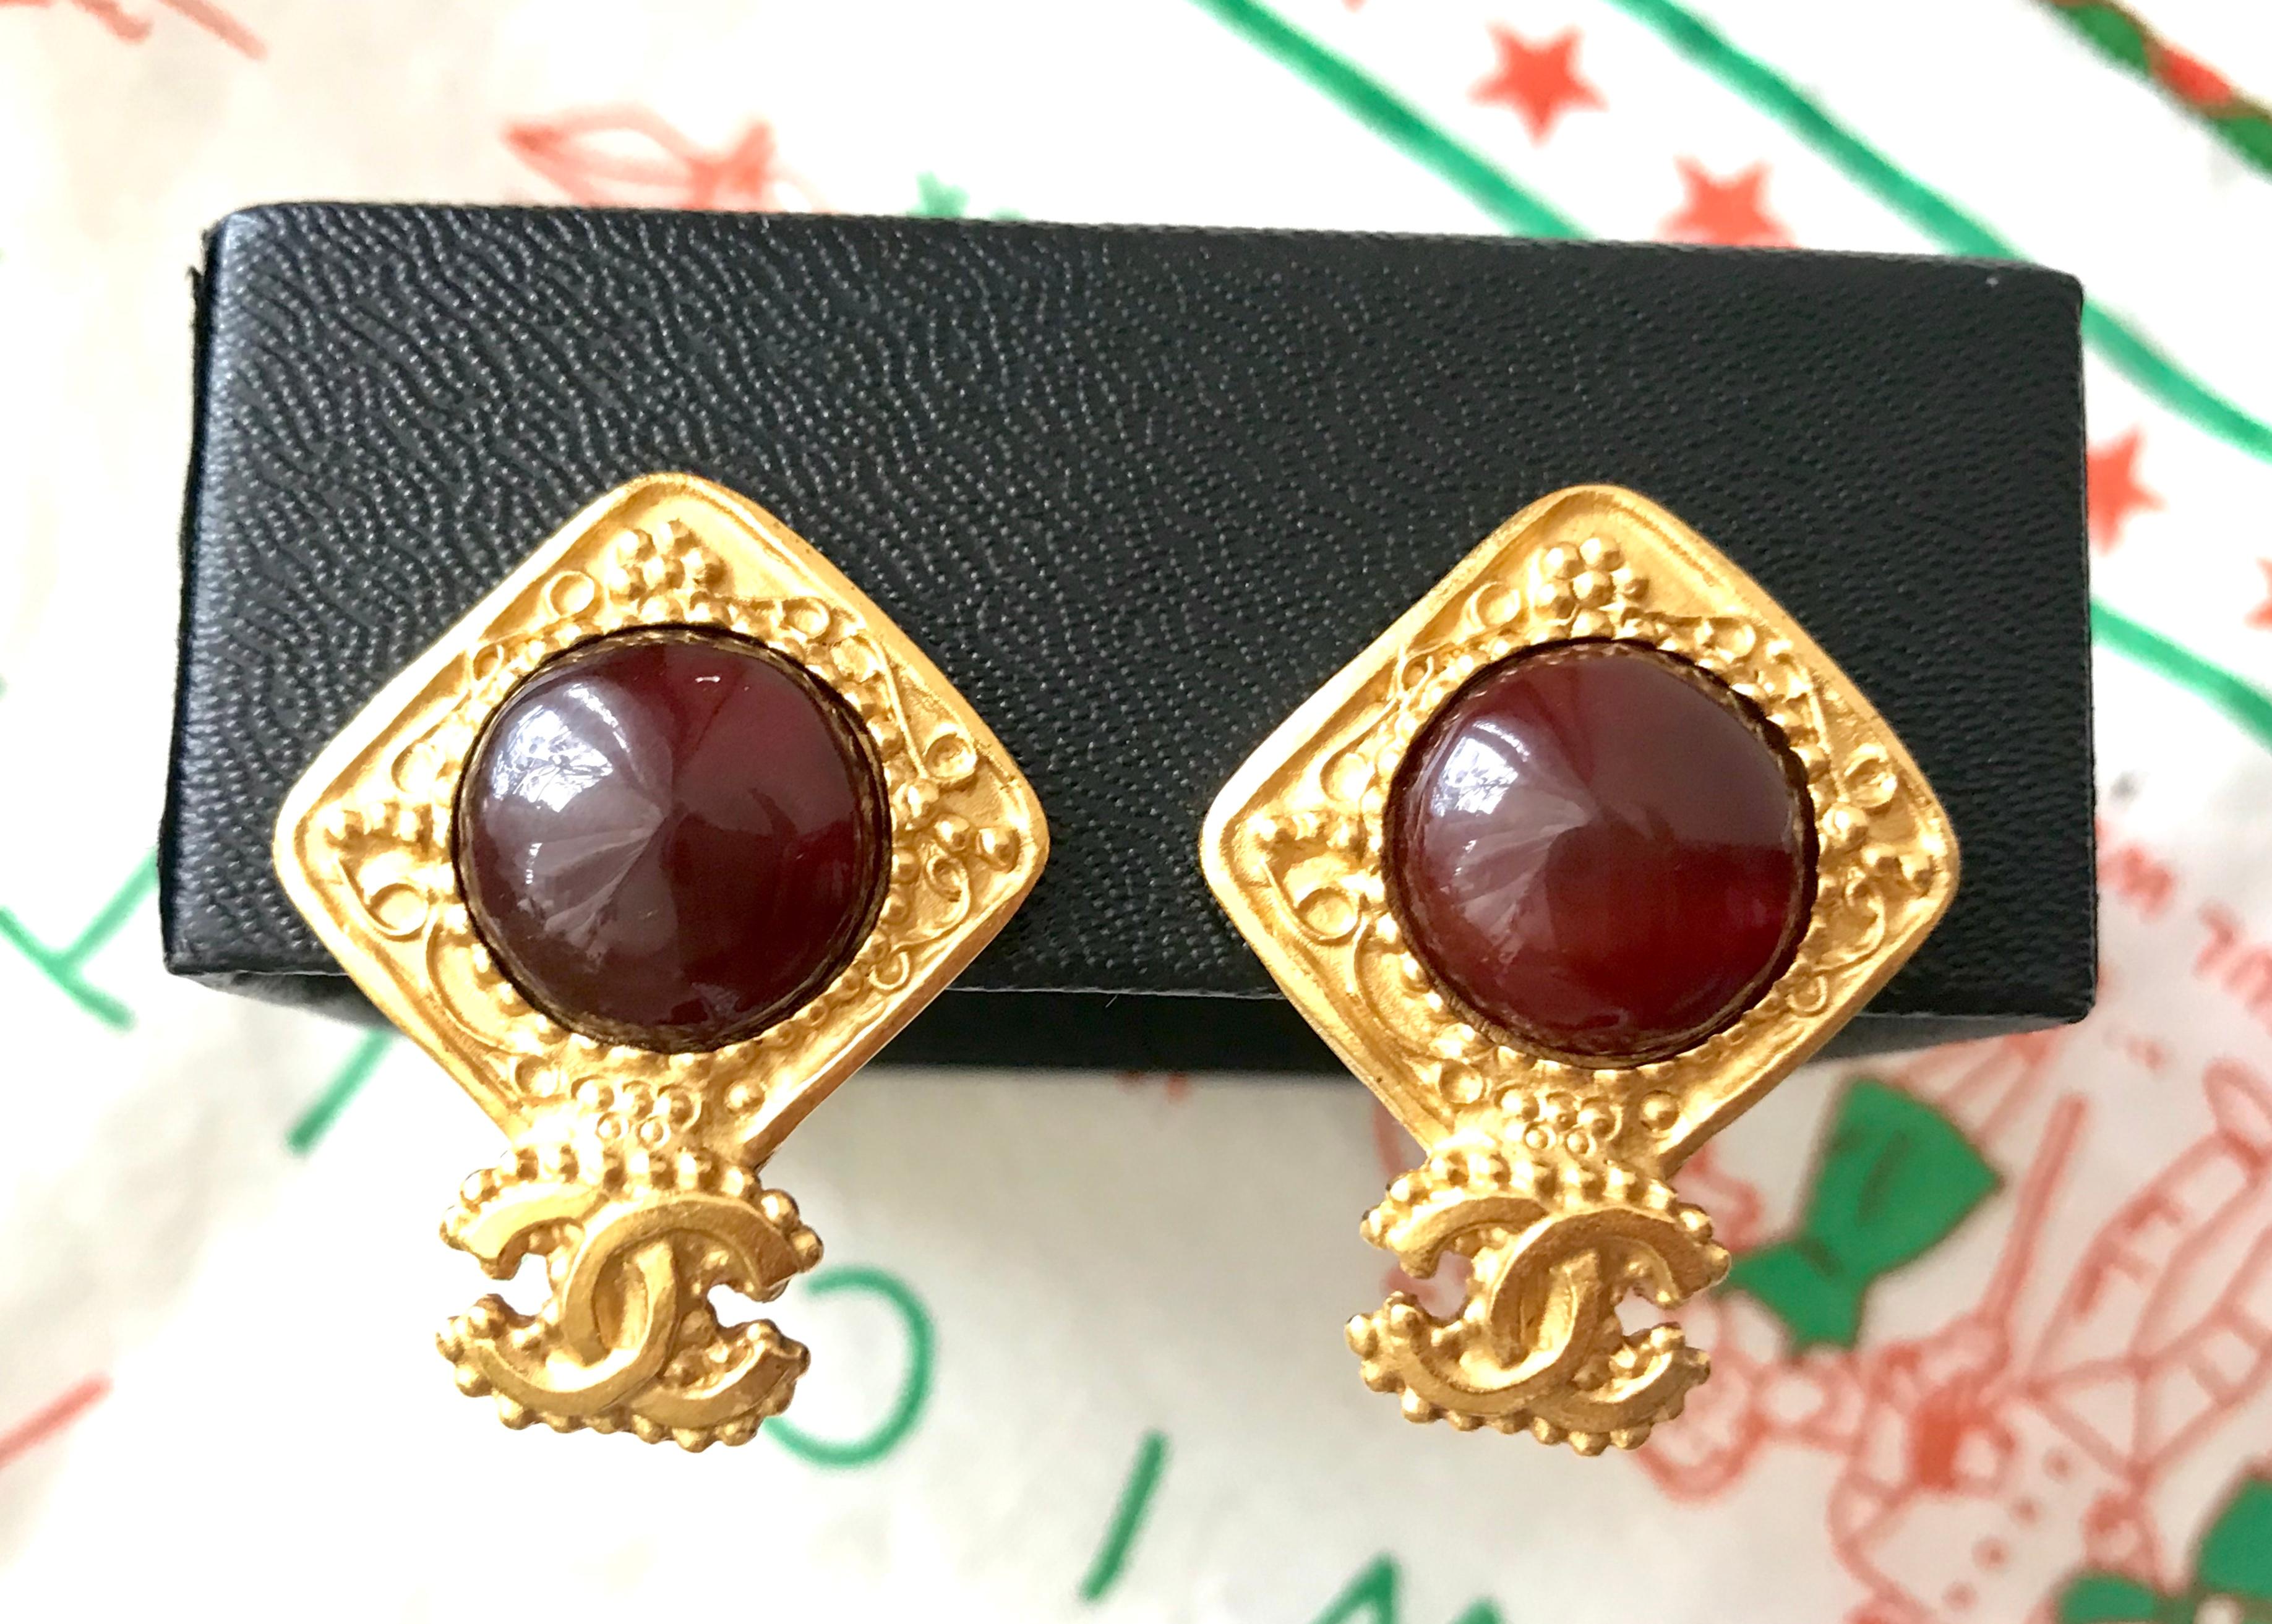 1990s. Vintage CHANEL golden square frame and wine red round gripoix glass stone earrings with CC mark. Beautiful and rare jewelry.

Introducing another rare vintage CHANEL jewelry with its iconic CC mark on it. 
Beautiful round wine red gripoix